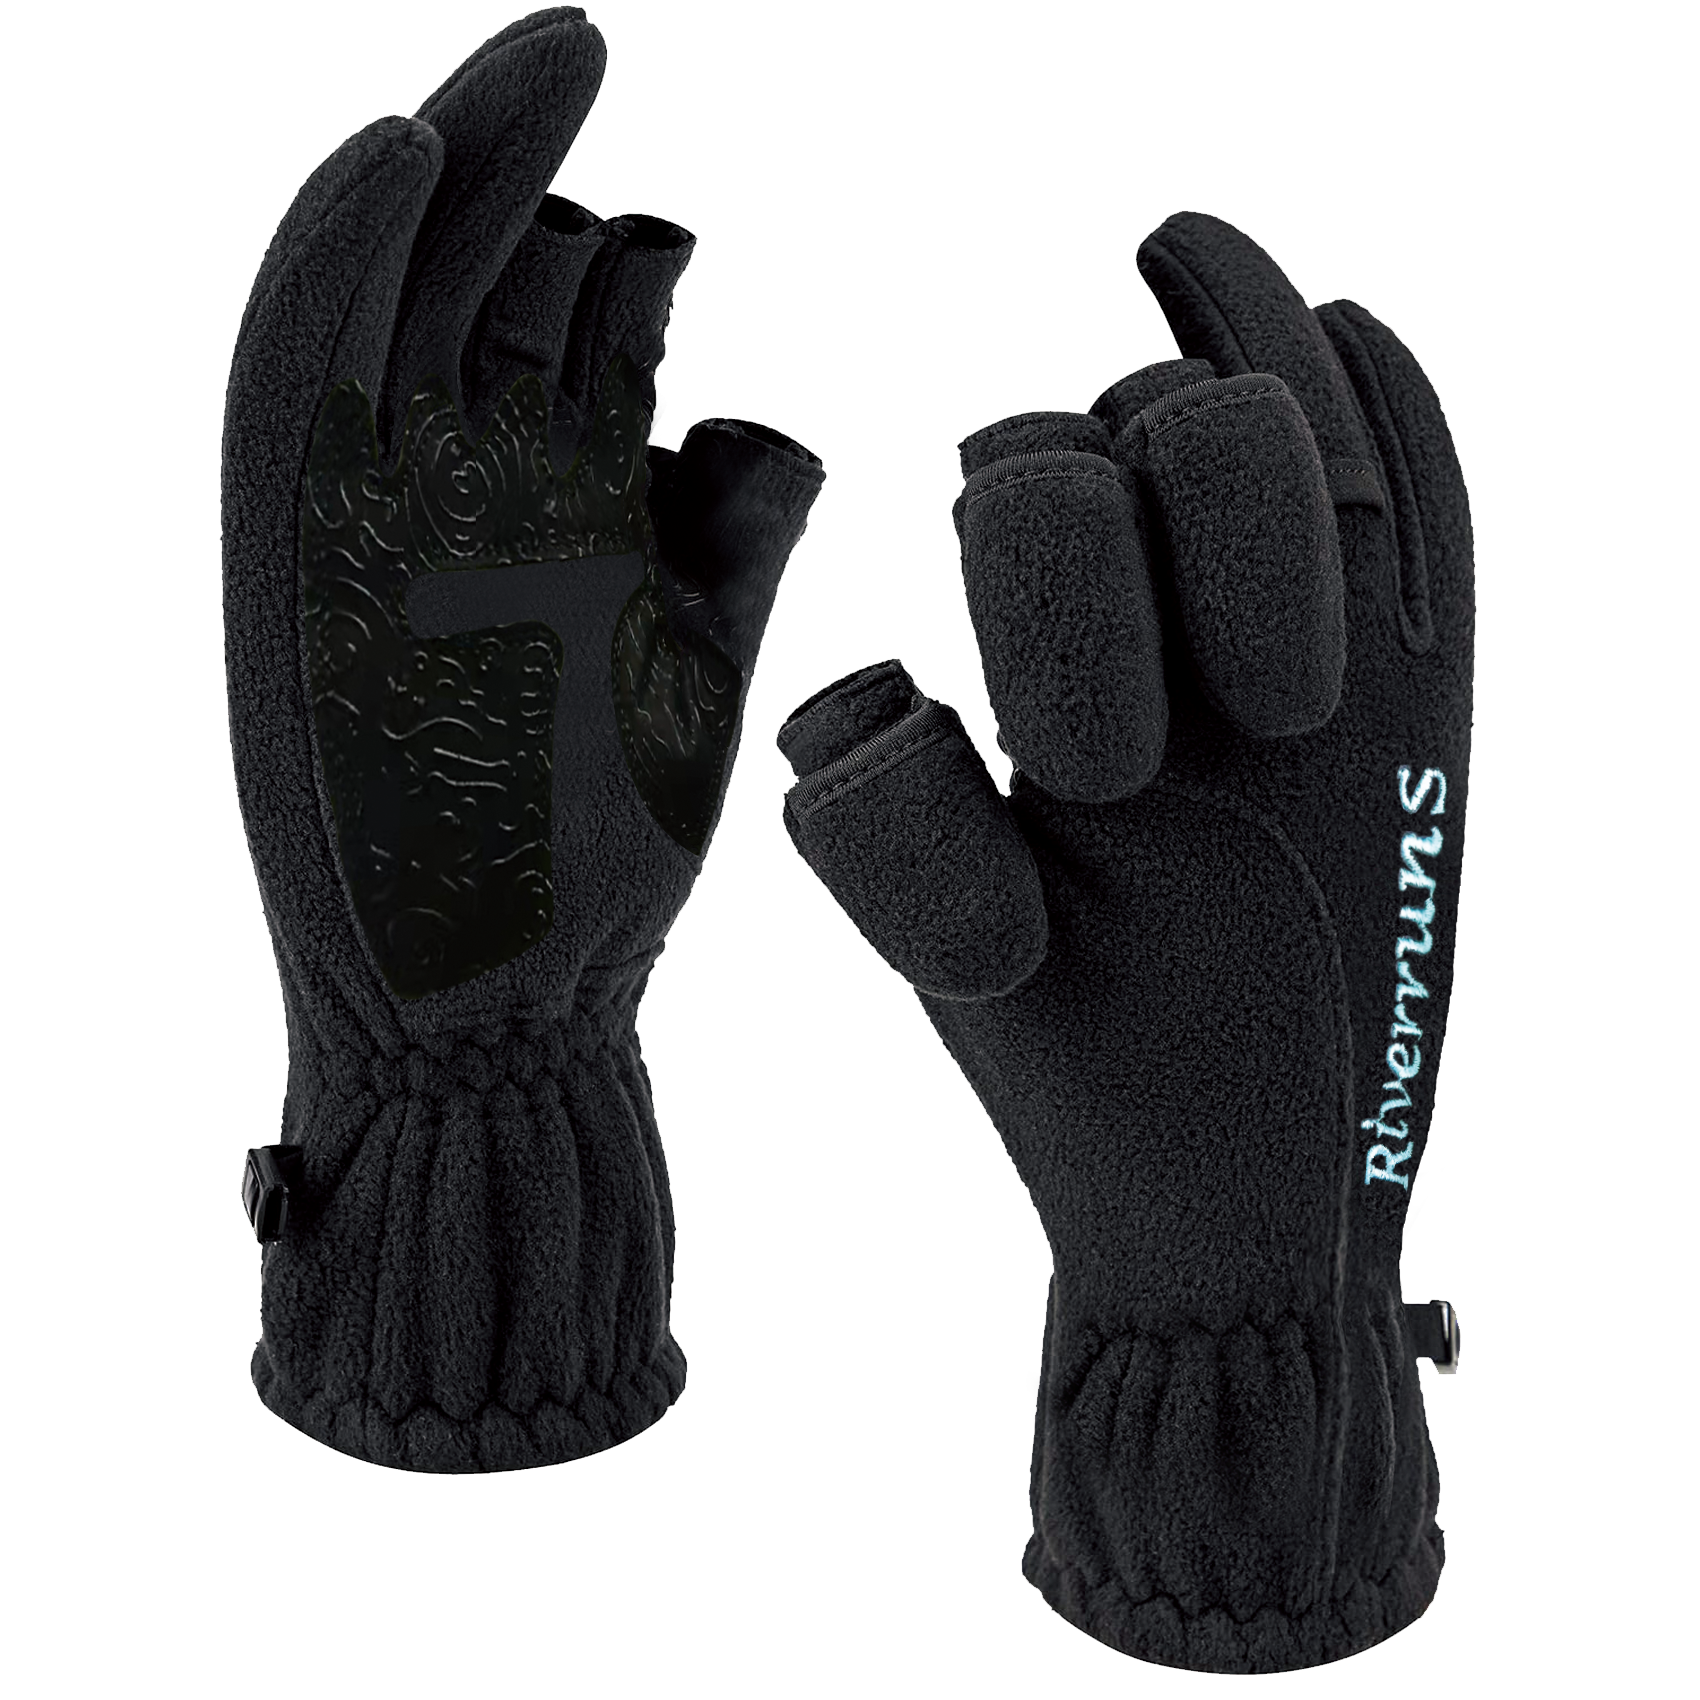 Hunting Winter Glovesunisex Winter Fishing Gloves - Anti-slip Warmth For  Outdoor Angling